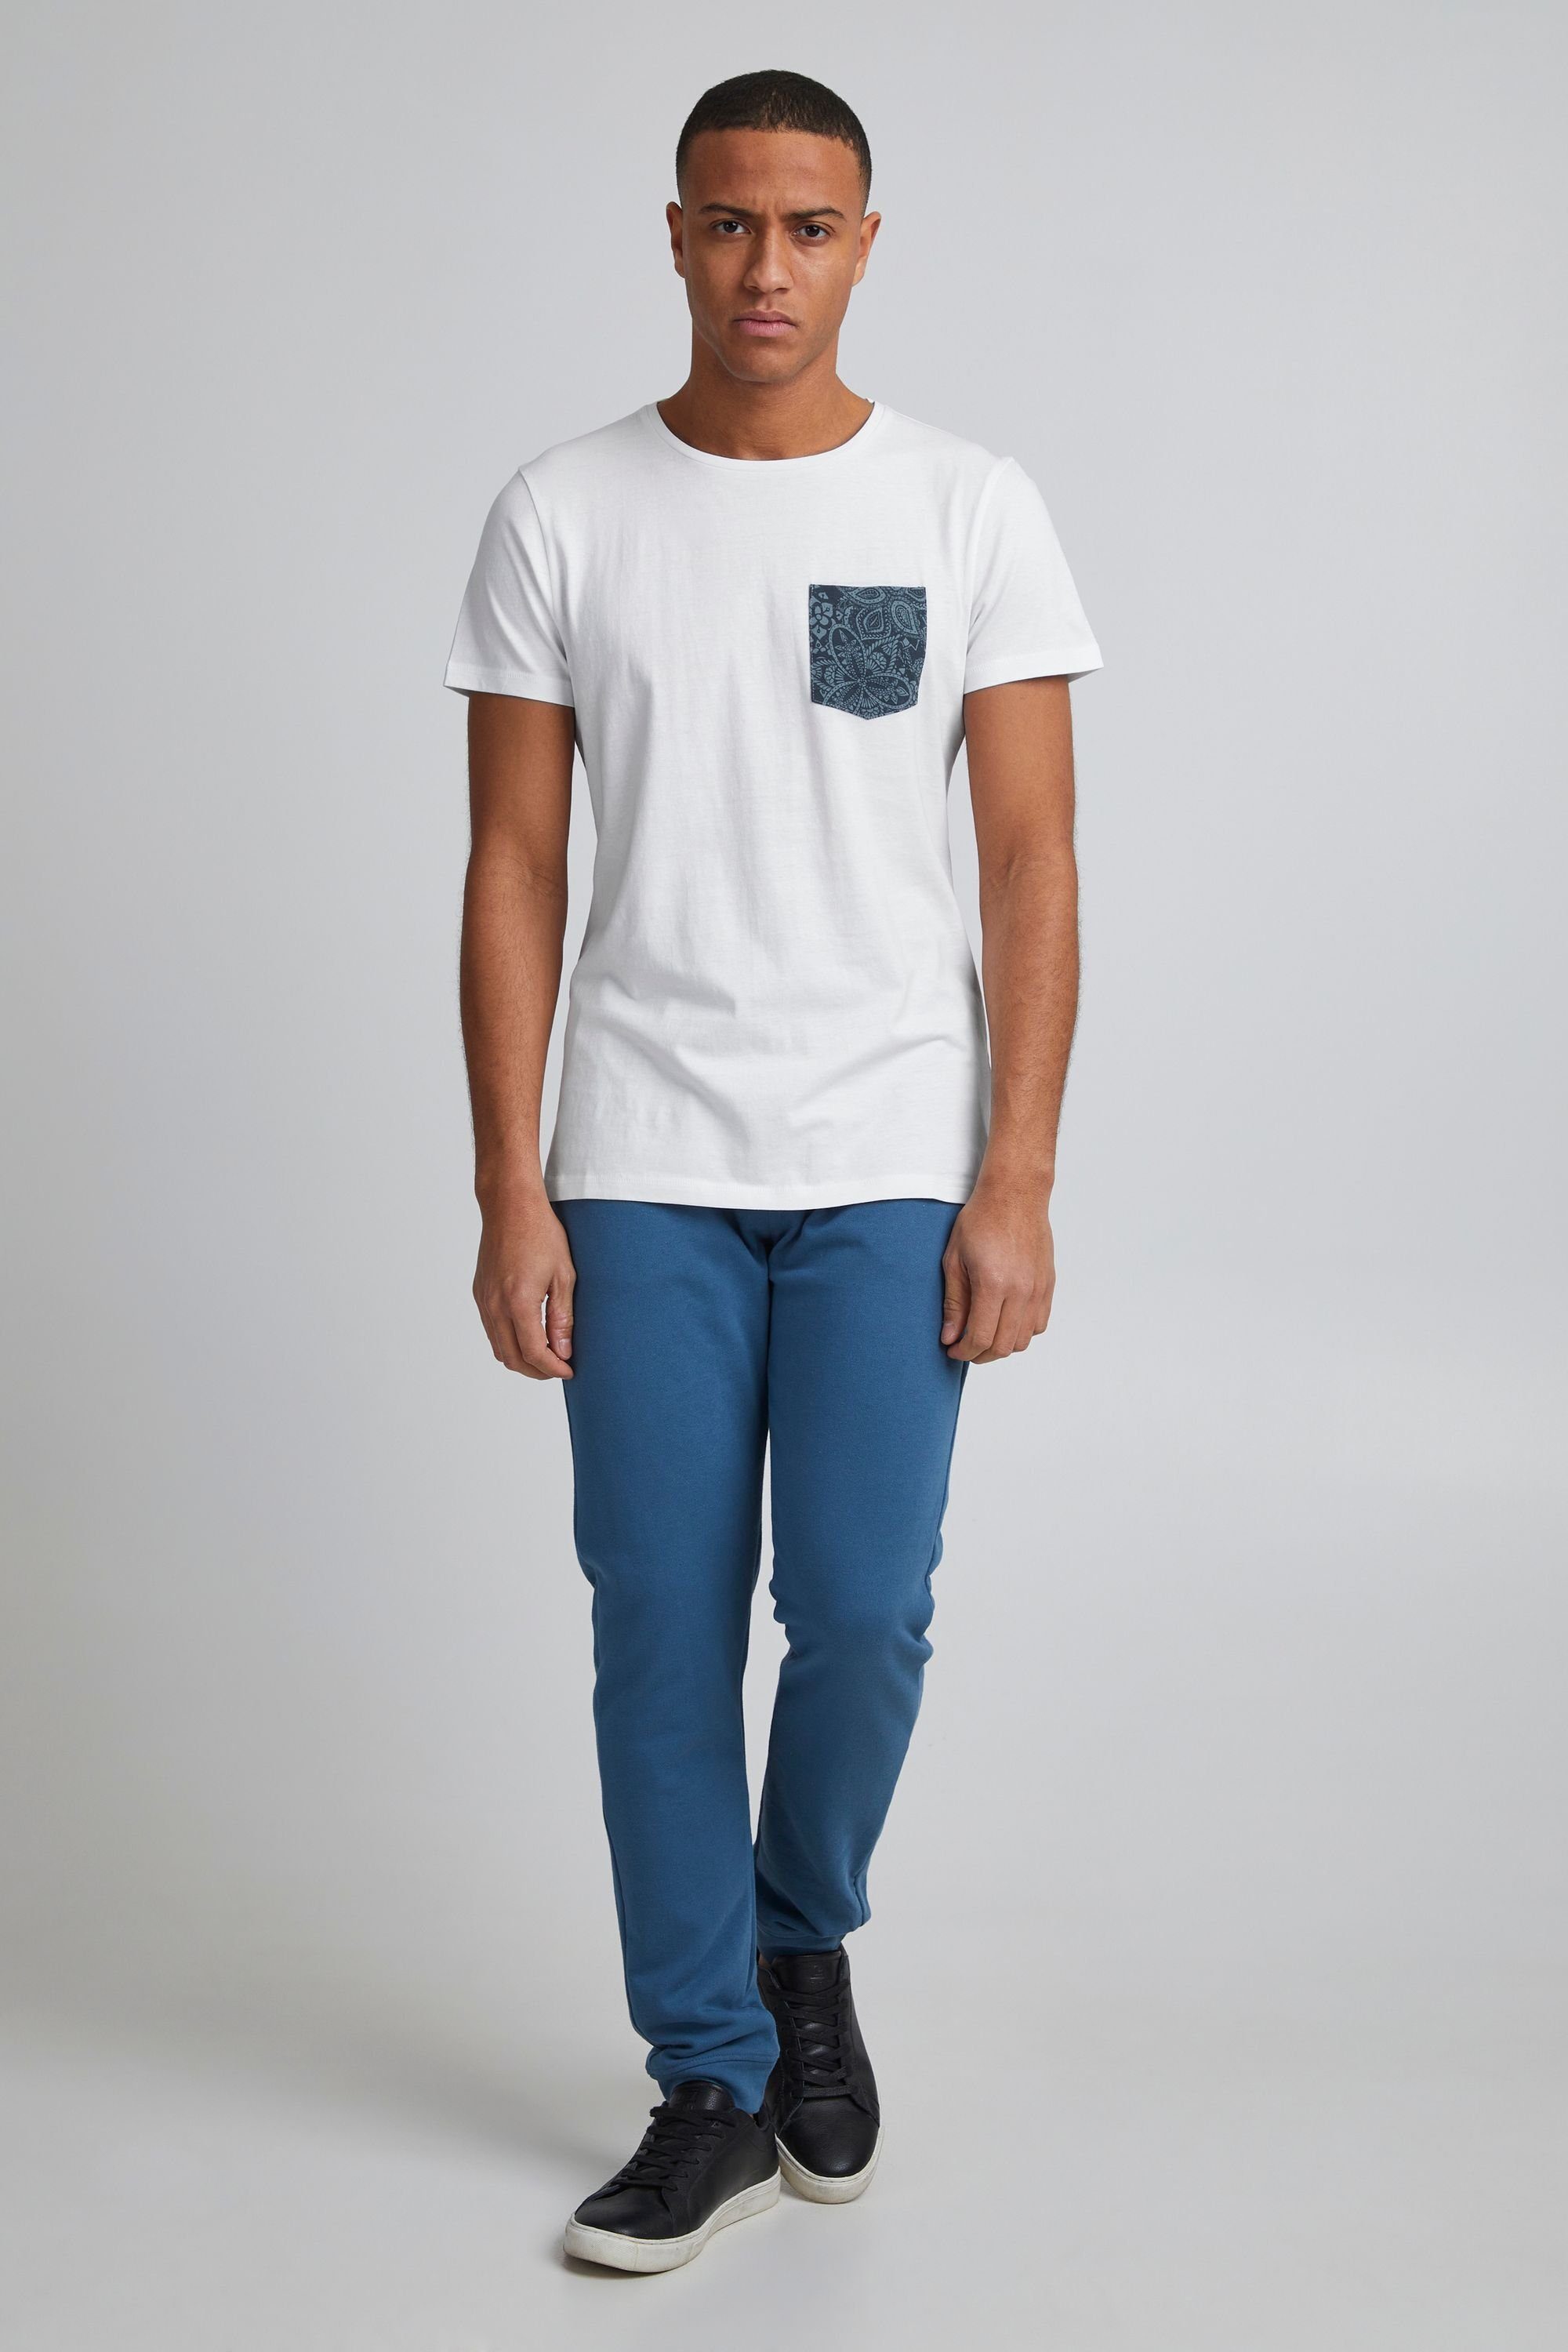 Project 11 PRYanis Snow 11 T-Shirt White Project